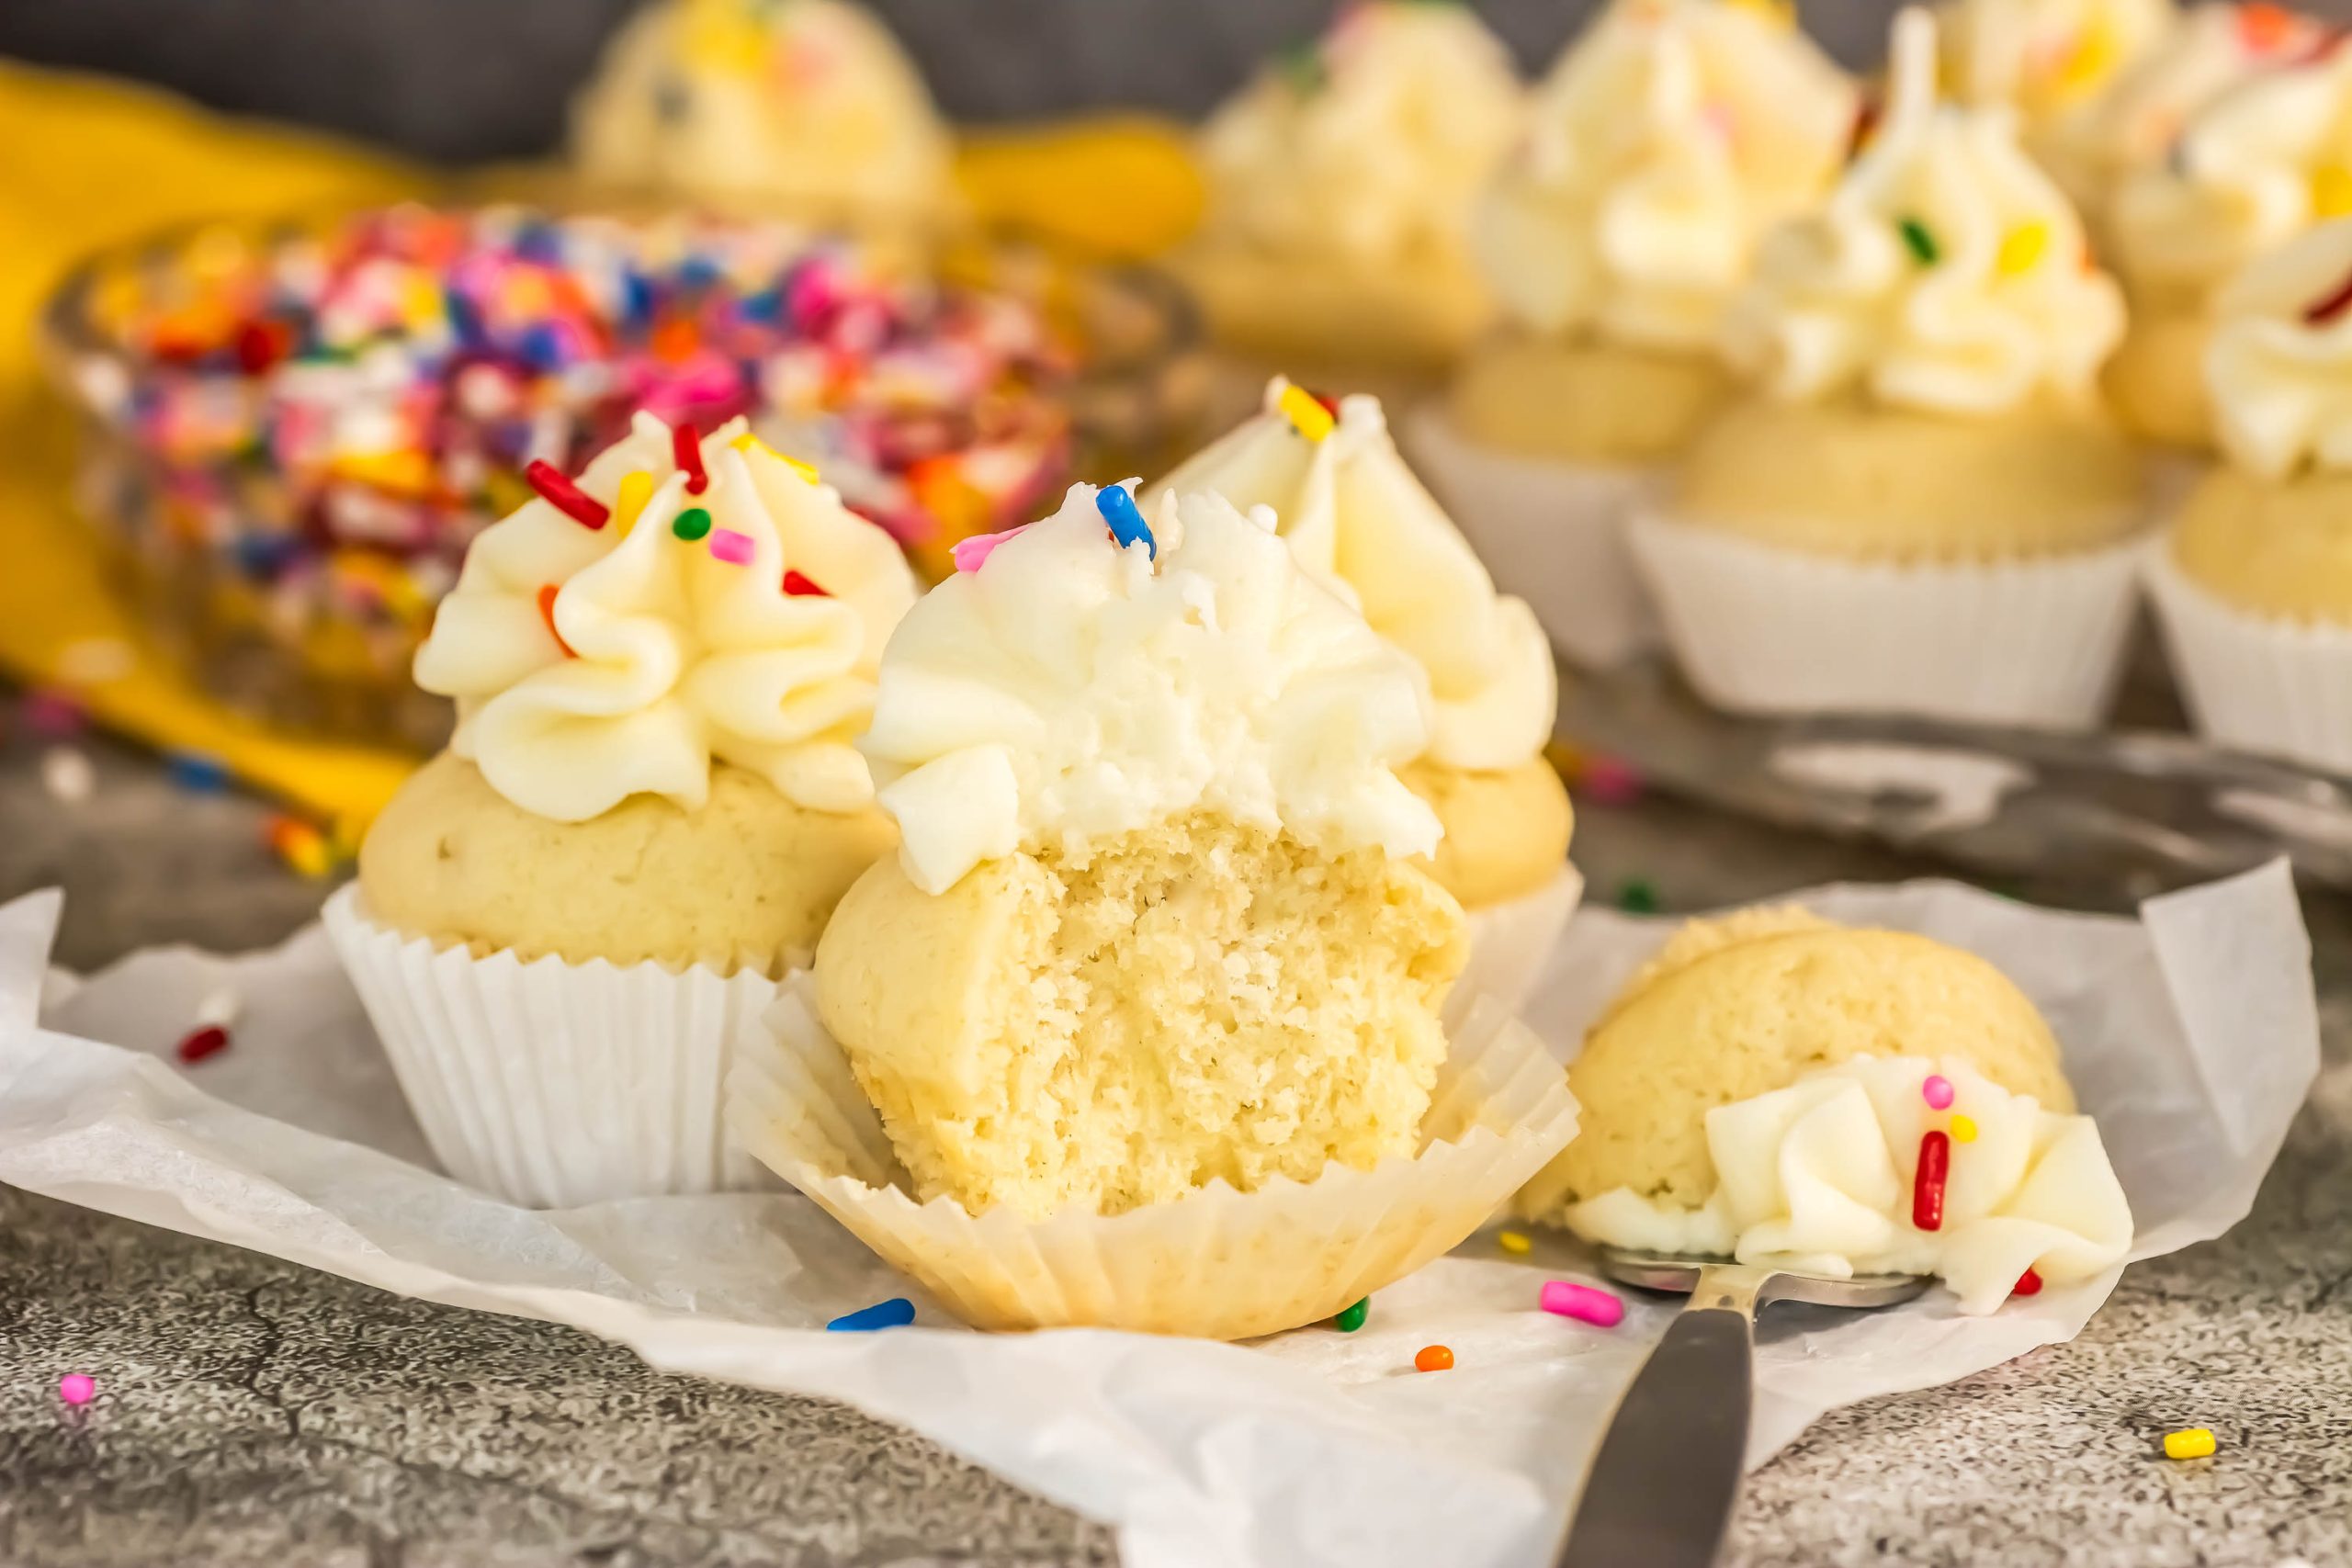 A group of cupcakes with frosting.